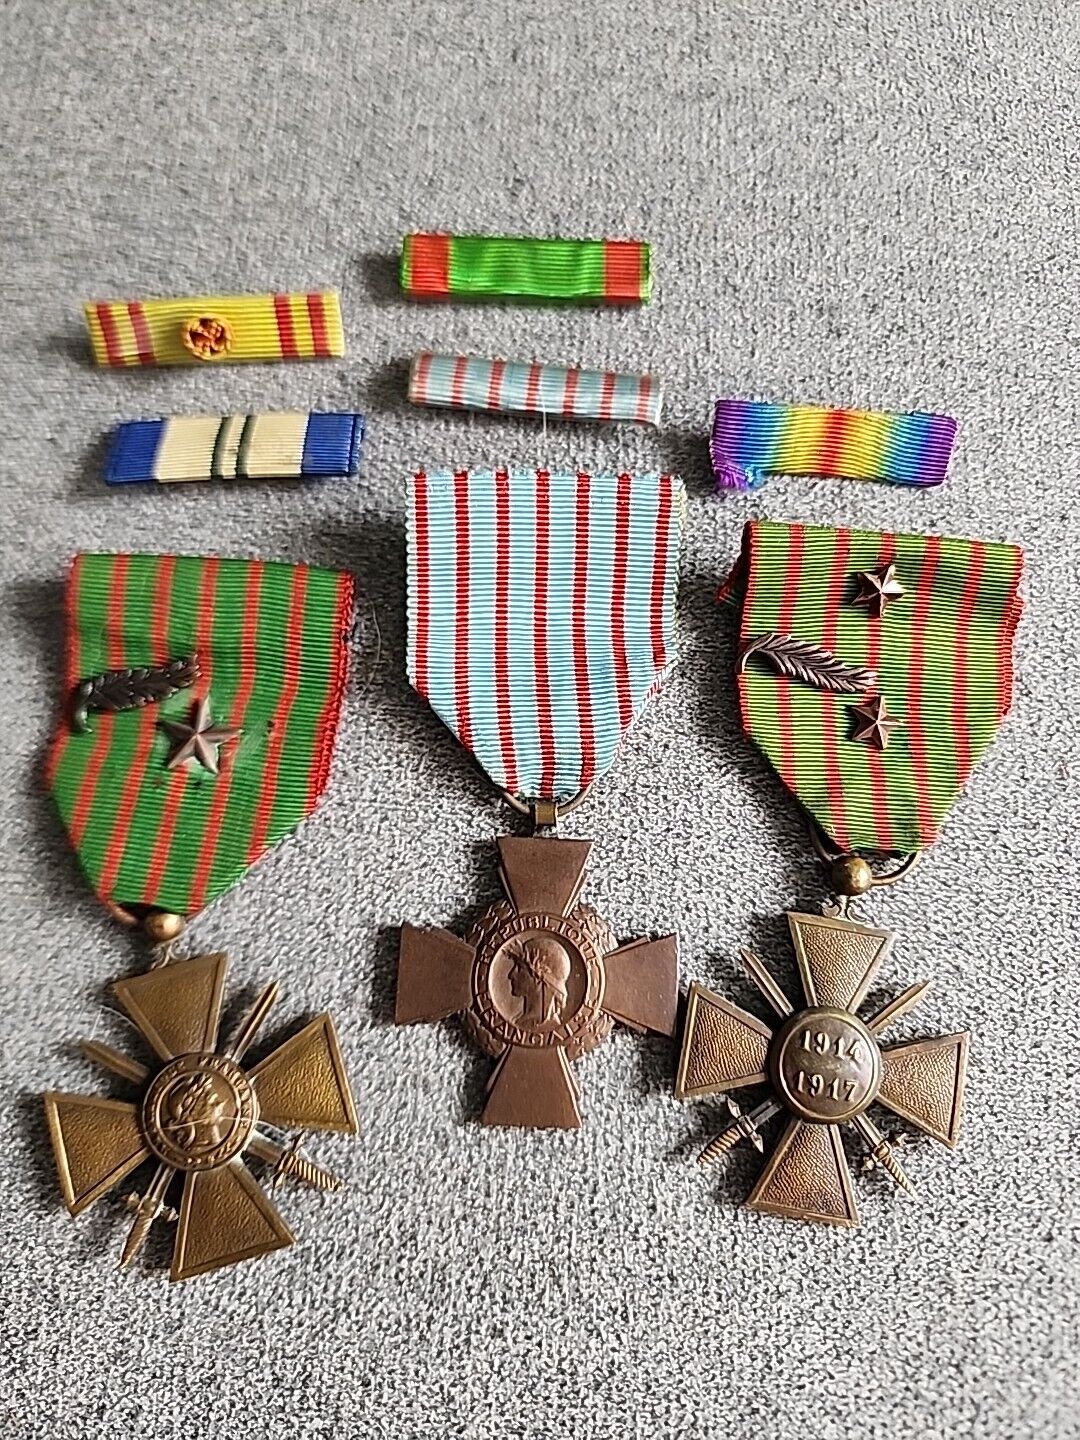 WW1 FRENCH MEDALS -RIBBONS DEALER LOT SALE SEE AUCTIONS -HUGE SALE GOING ON